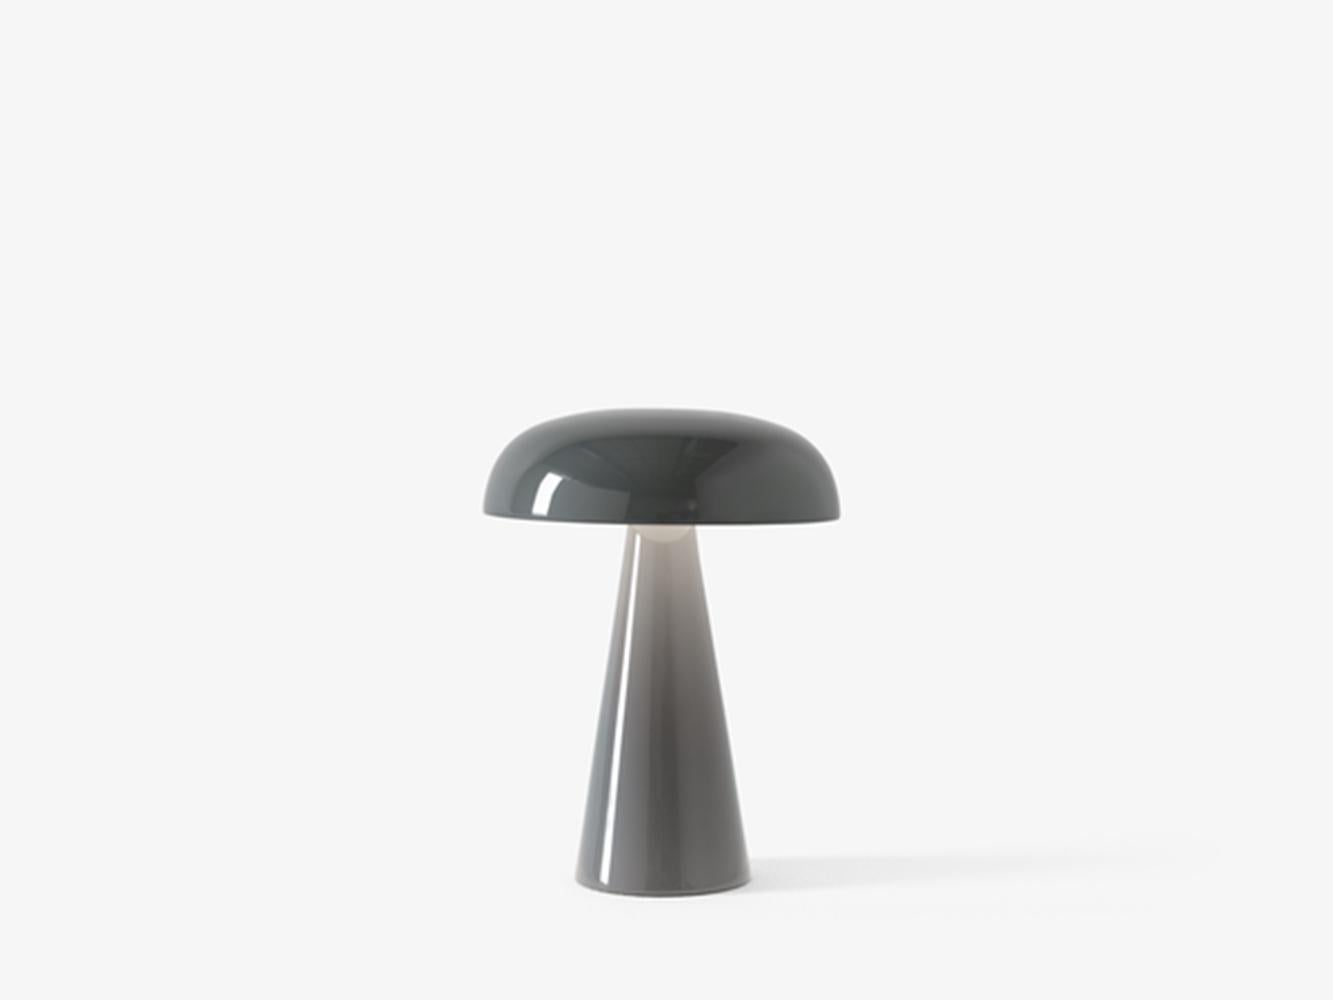 Como SC53, a portable Stone blue table lamp from Space Copenhagen. 
Como’s sturdy base tapers up towards a softy curved, mushroom-shaped shade. 
This battery-powered lamp can operate for eleven hours at the highest setting, with an extra battery